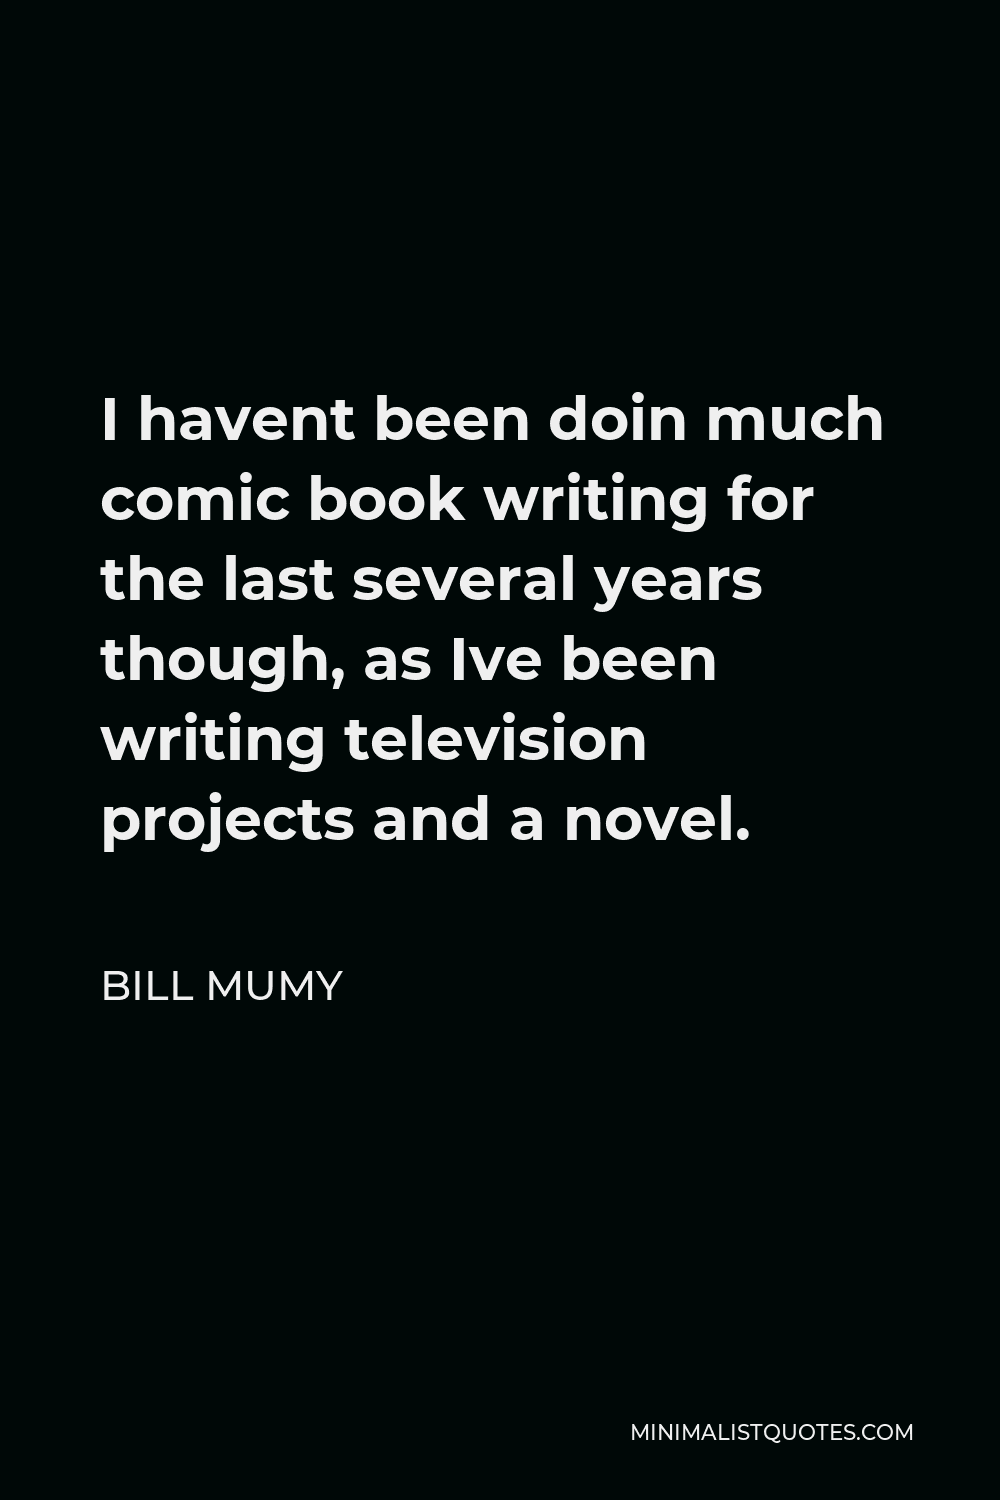 Bill Mumy Quote - I havent been doin much comic book writing for the last several years though, as Ive been writing television projects and a novel.